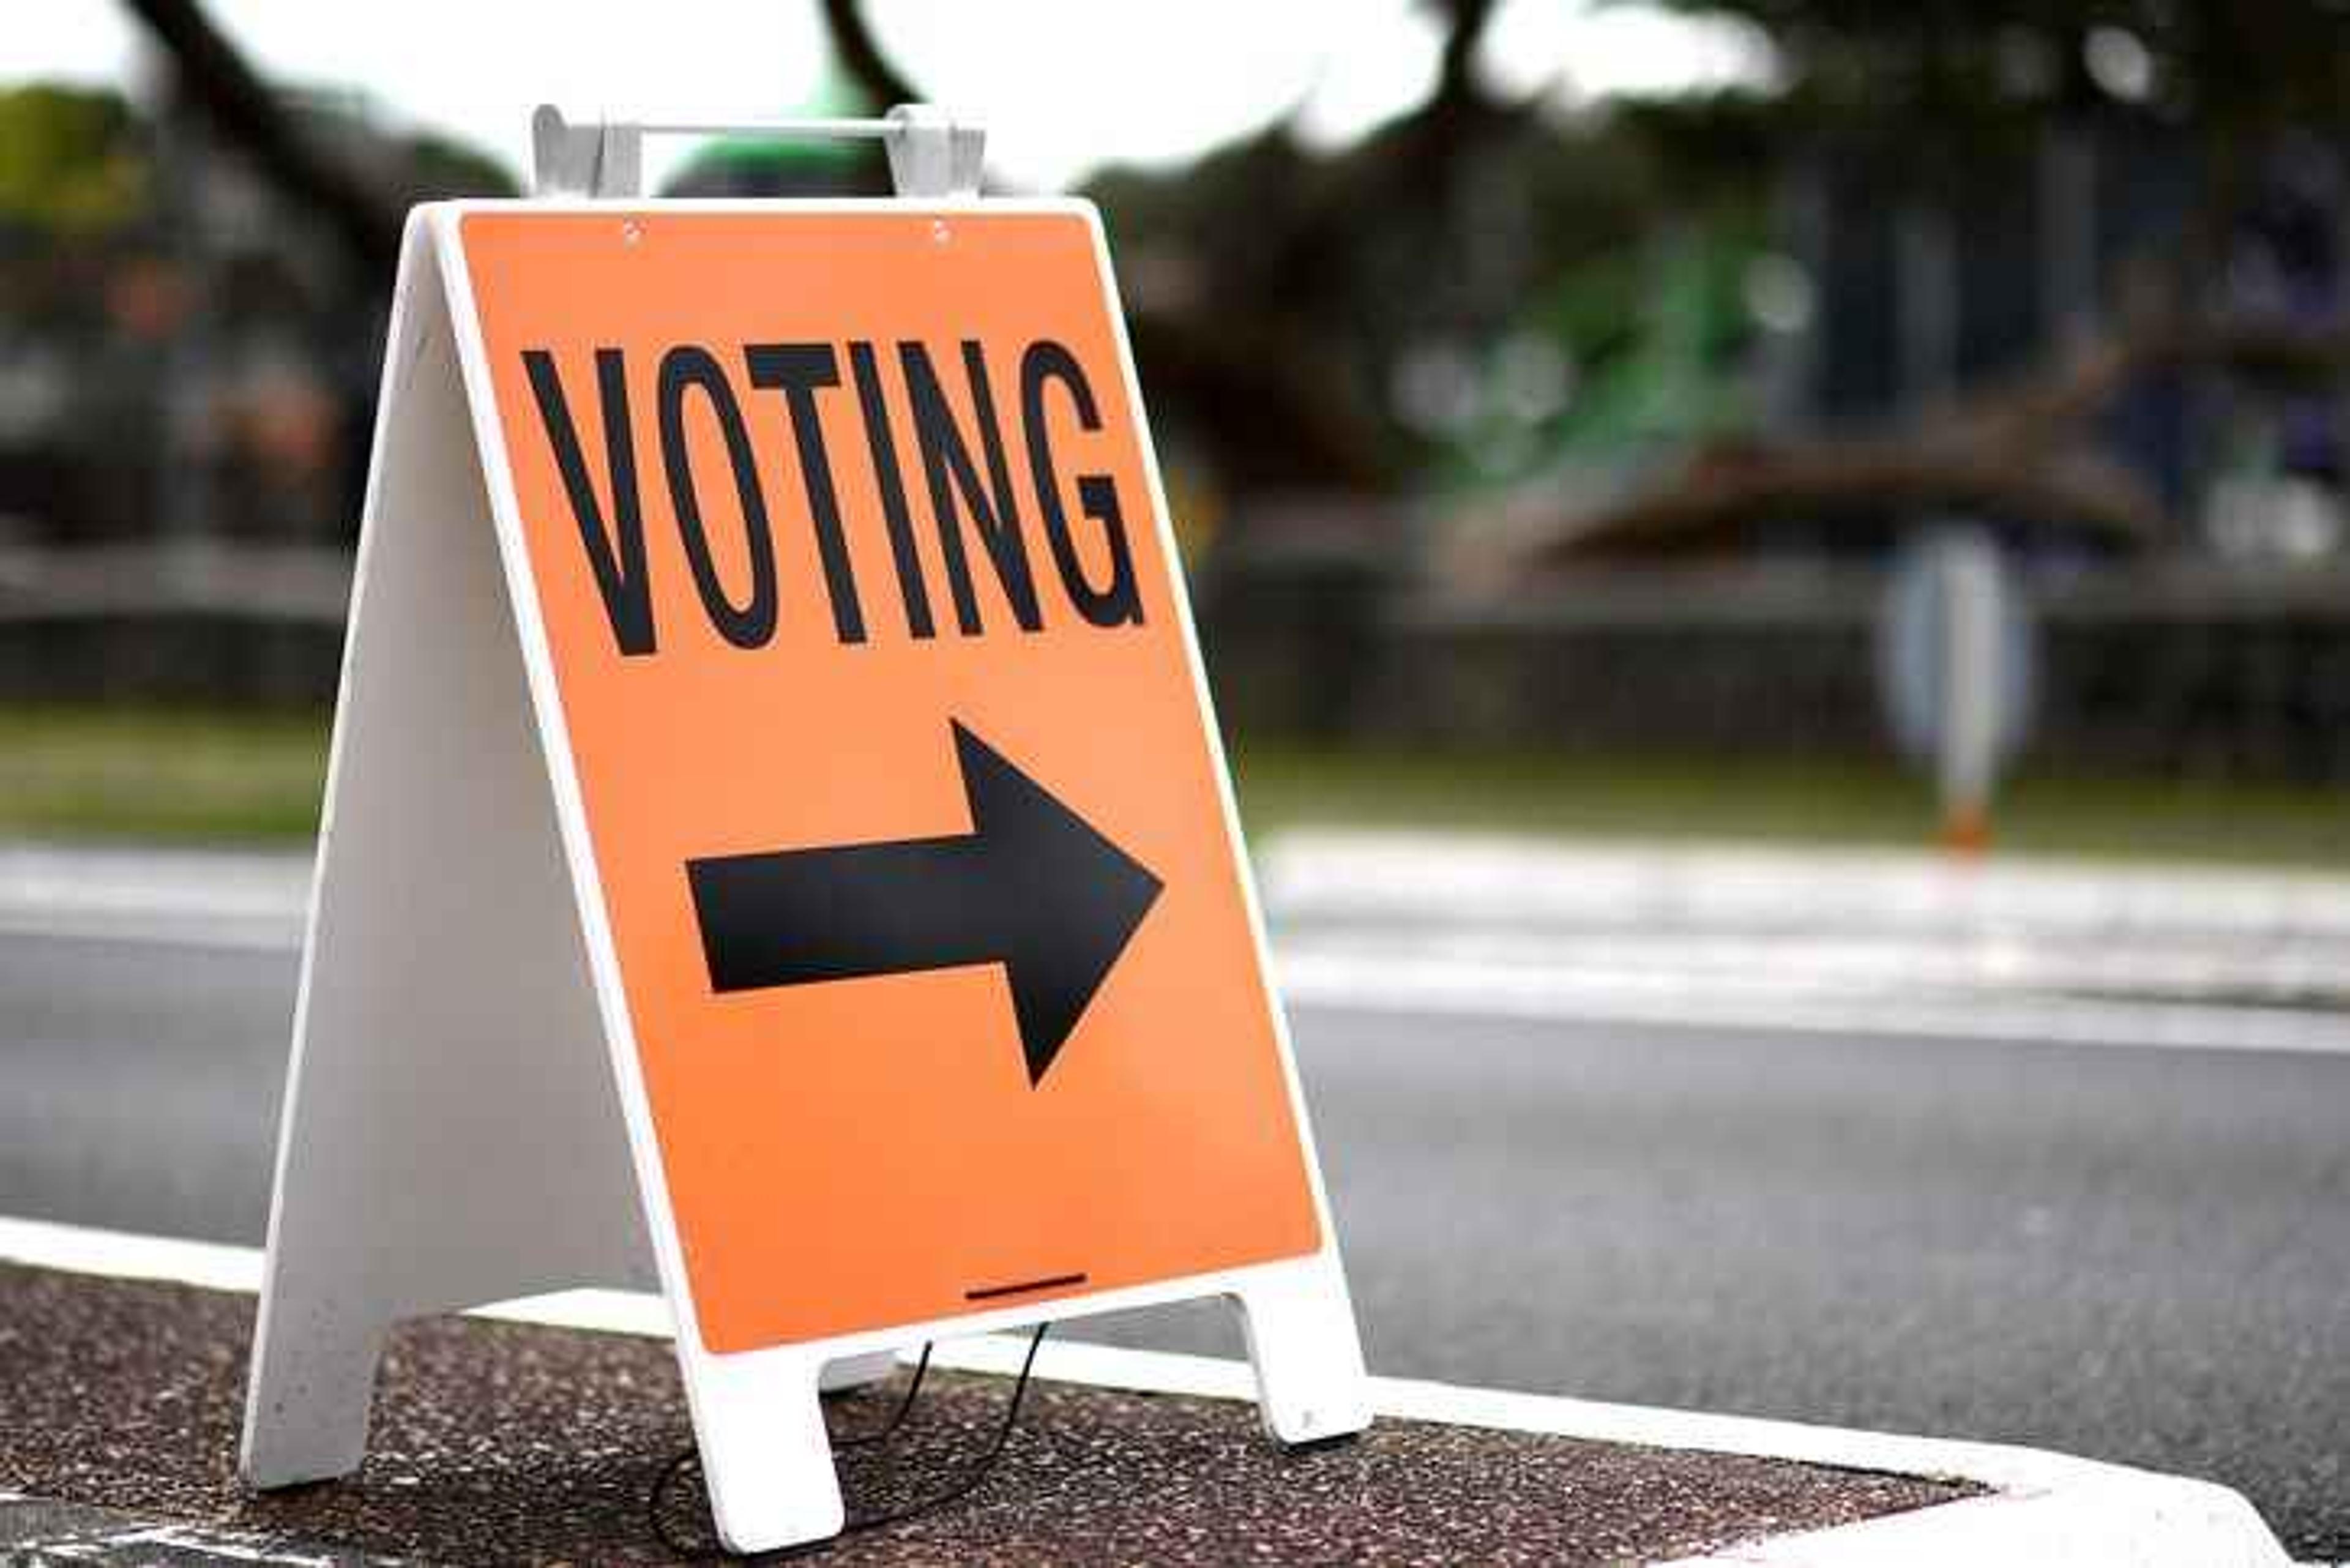 Advance voting has grown in popularity with more than two thirds of votes cast before election day in 2020. 